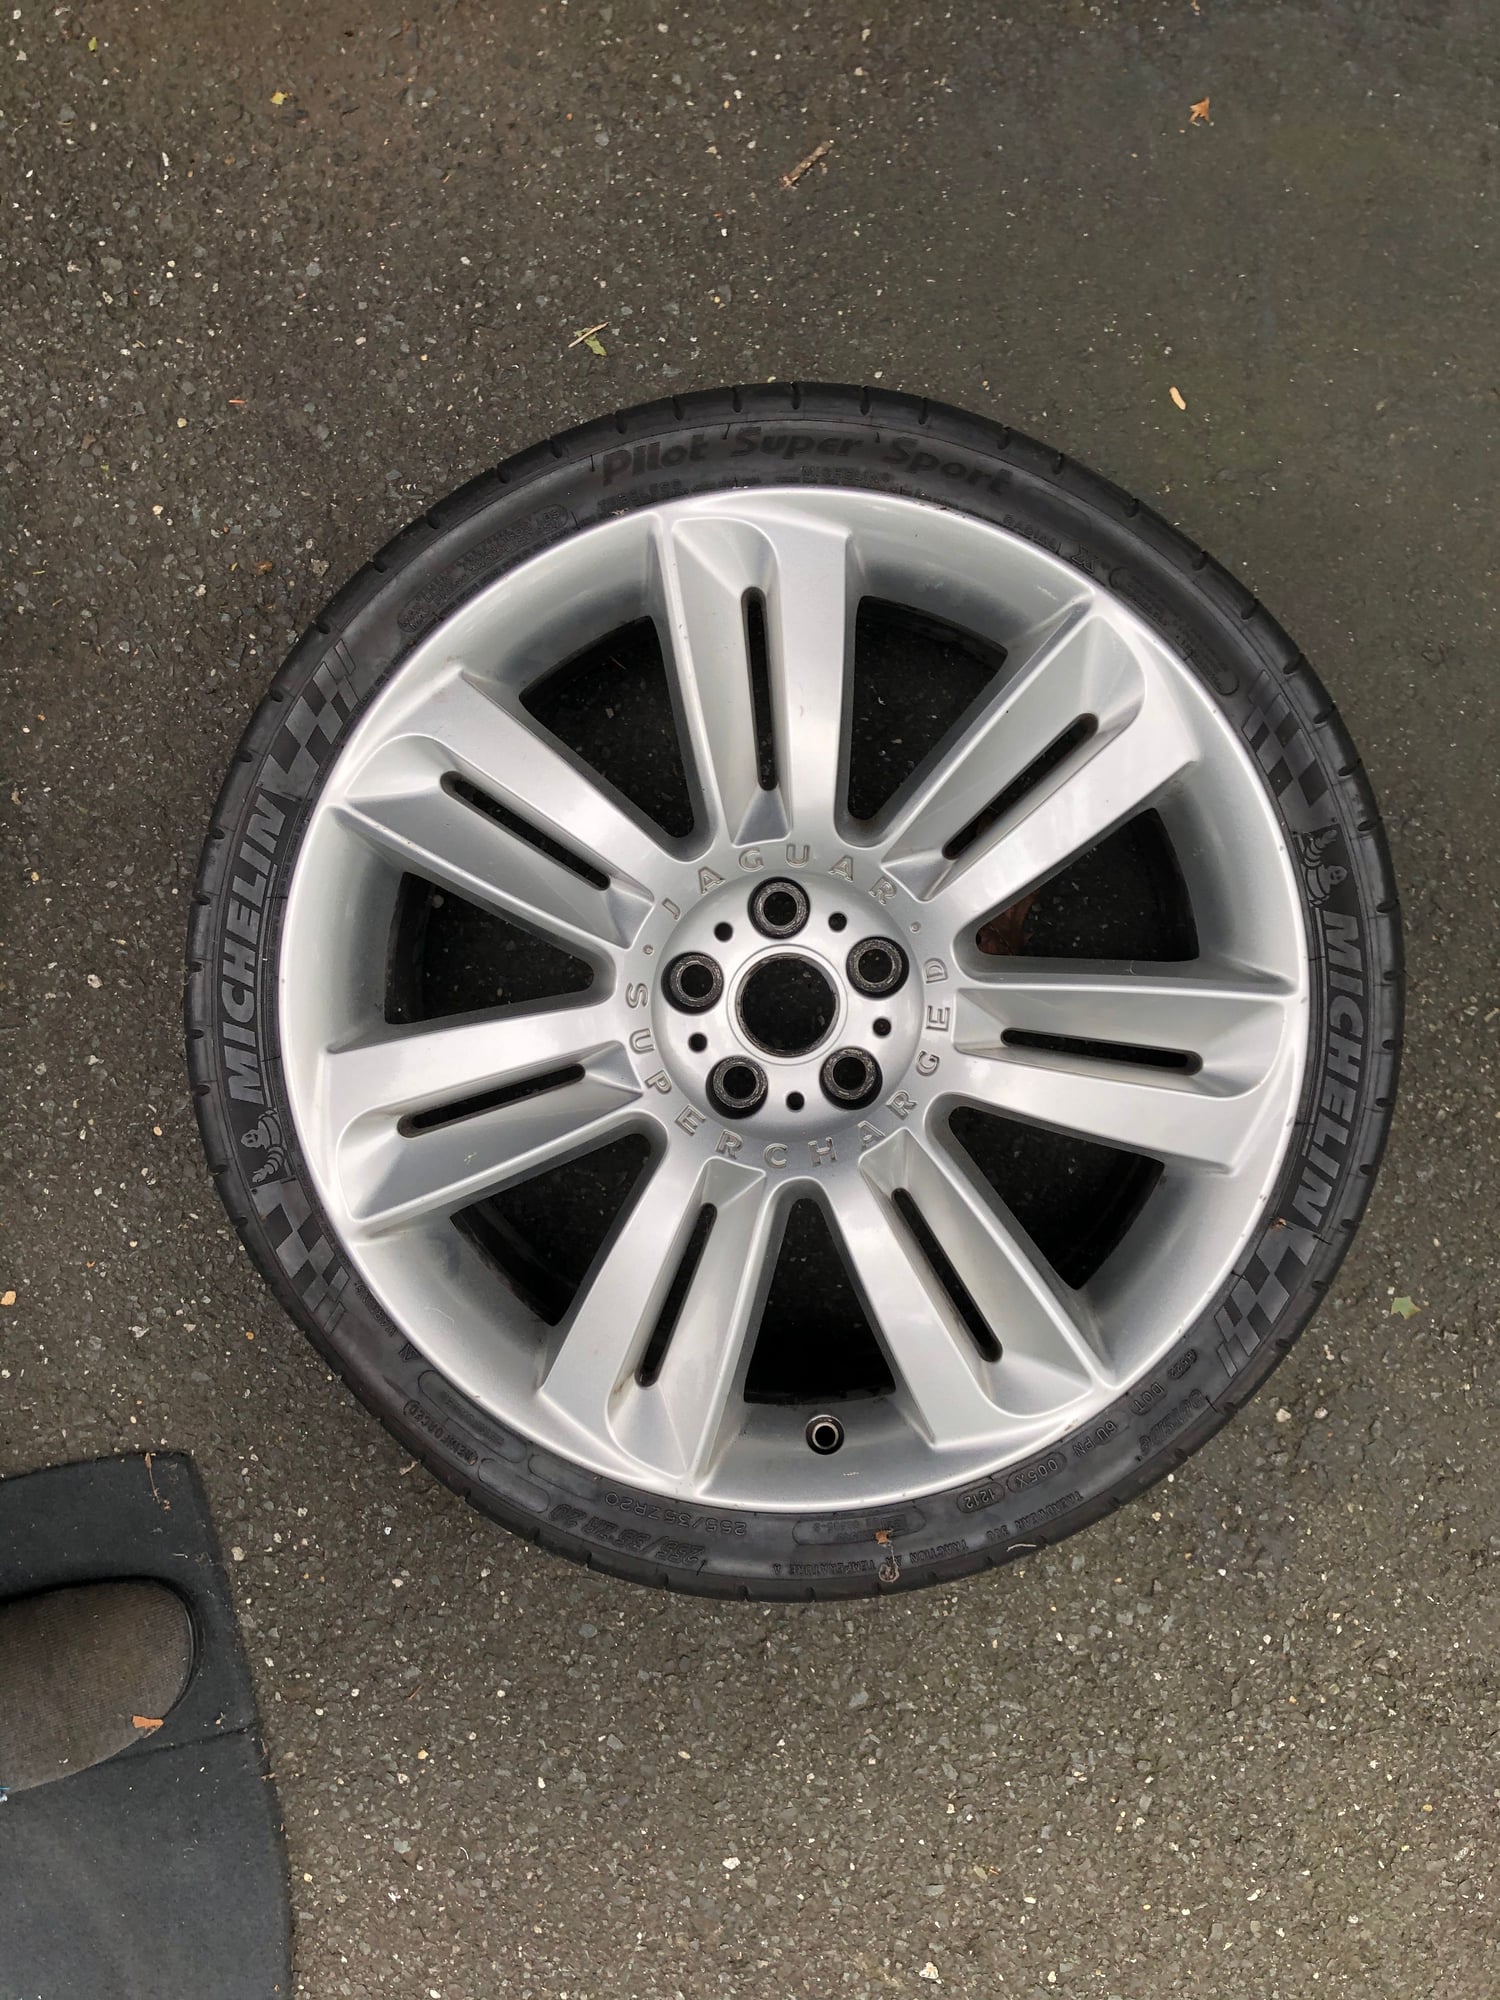 Wheels and Tires/Axles - Front XFR rim - Used - 2010 to 2014 Jaguar XFR - Oakland, NJ 07436, United States